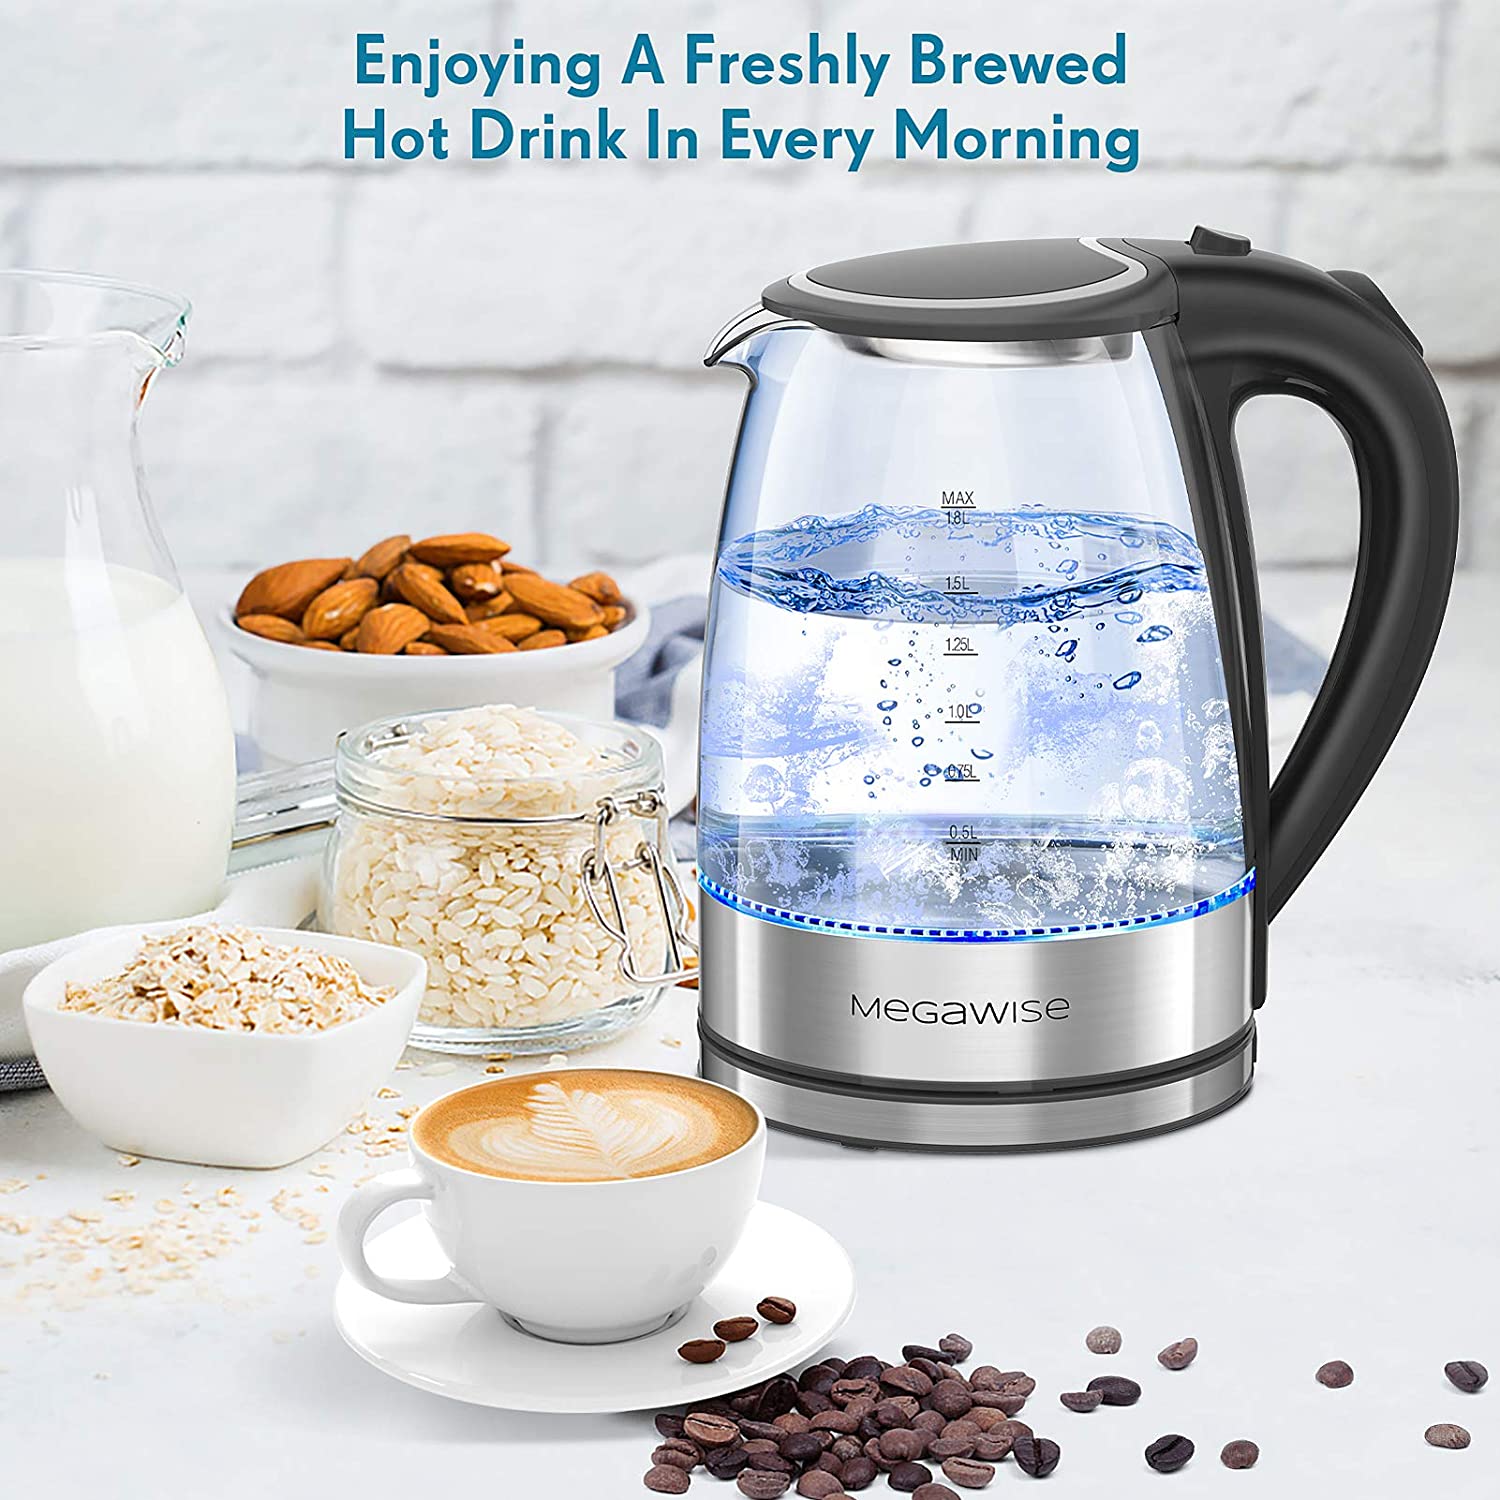 MEGAWISE 1500W Electric Kettle: 1.8L Borosilicate Glass Tea Kettle with LED Light, Auto Shut-Off, Boil-Dry Protection, Fast Boiling and Durable Design